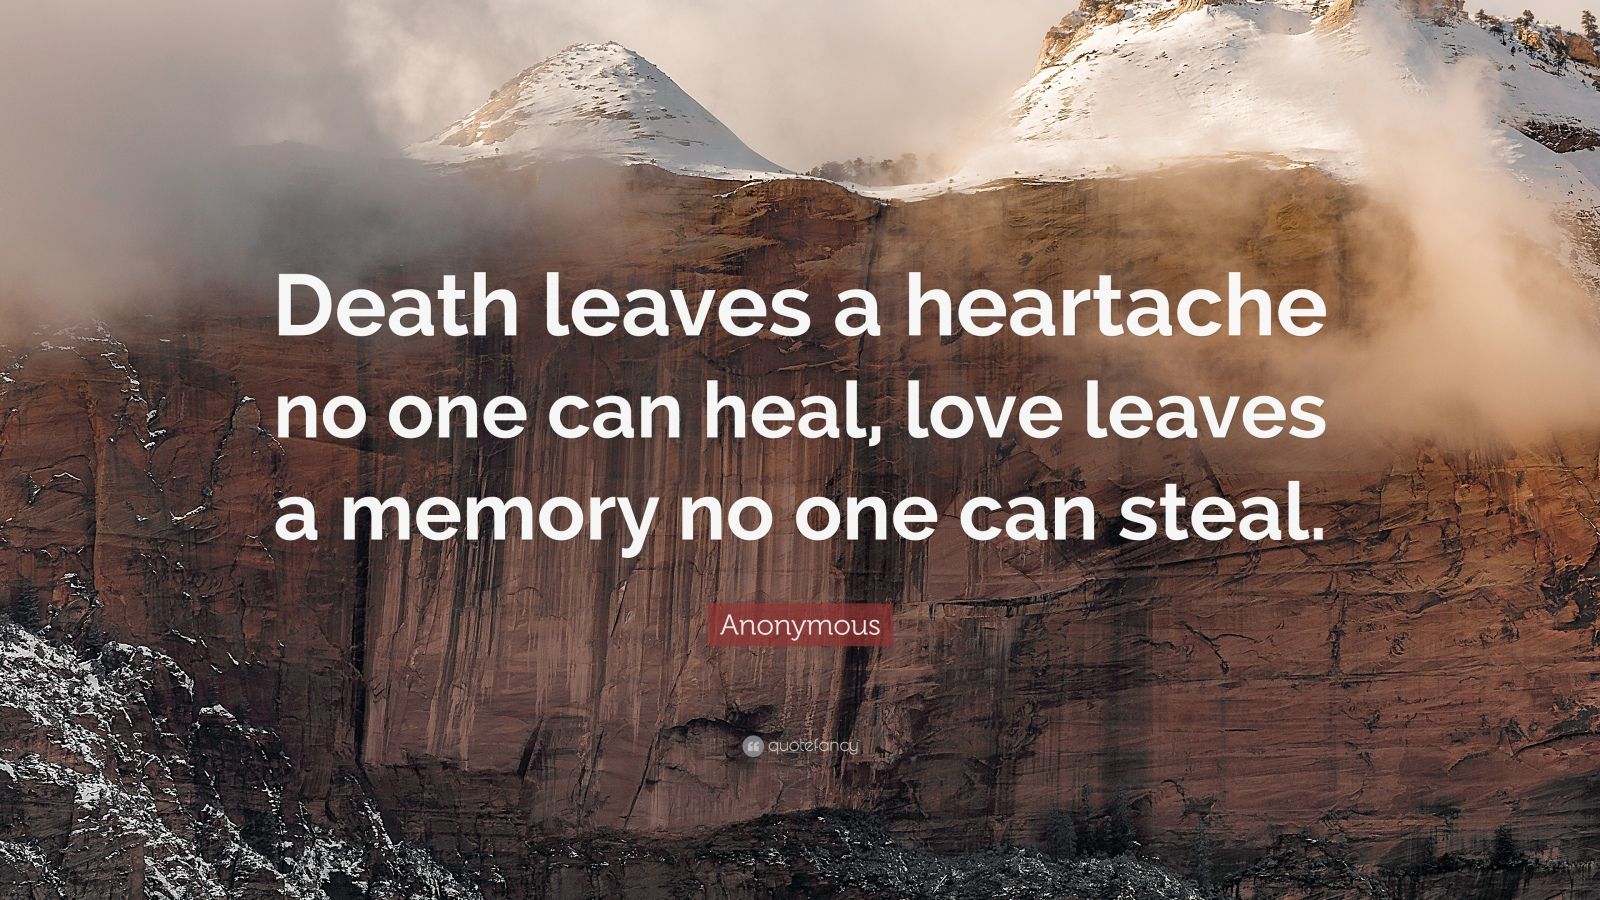 Anonymous Quote: “Death leaves a heartache no one can heal, love leaves